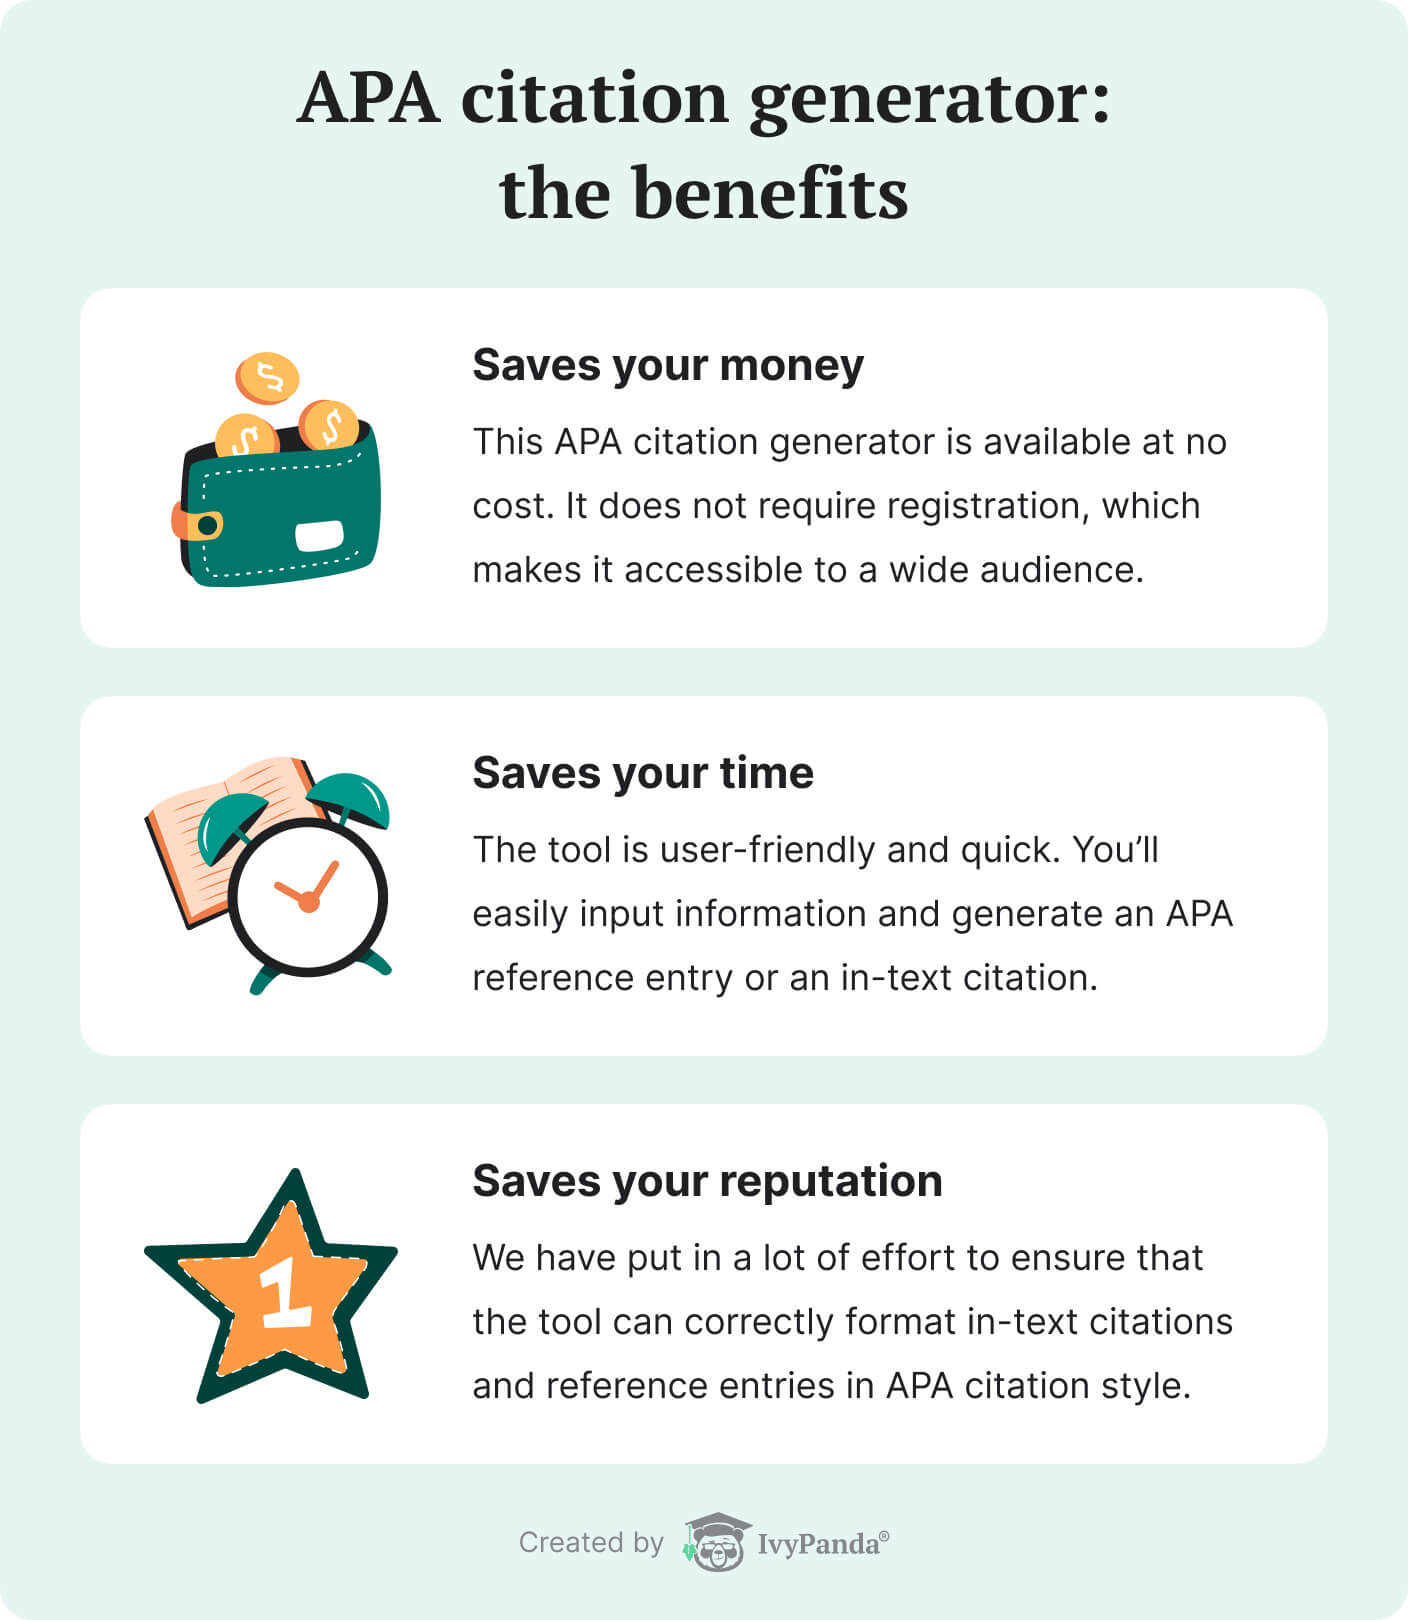 The picture lists the key benefits of an APA citation generator by IvyPanda.